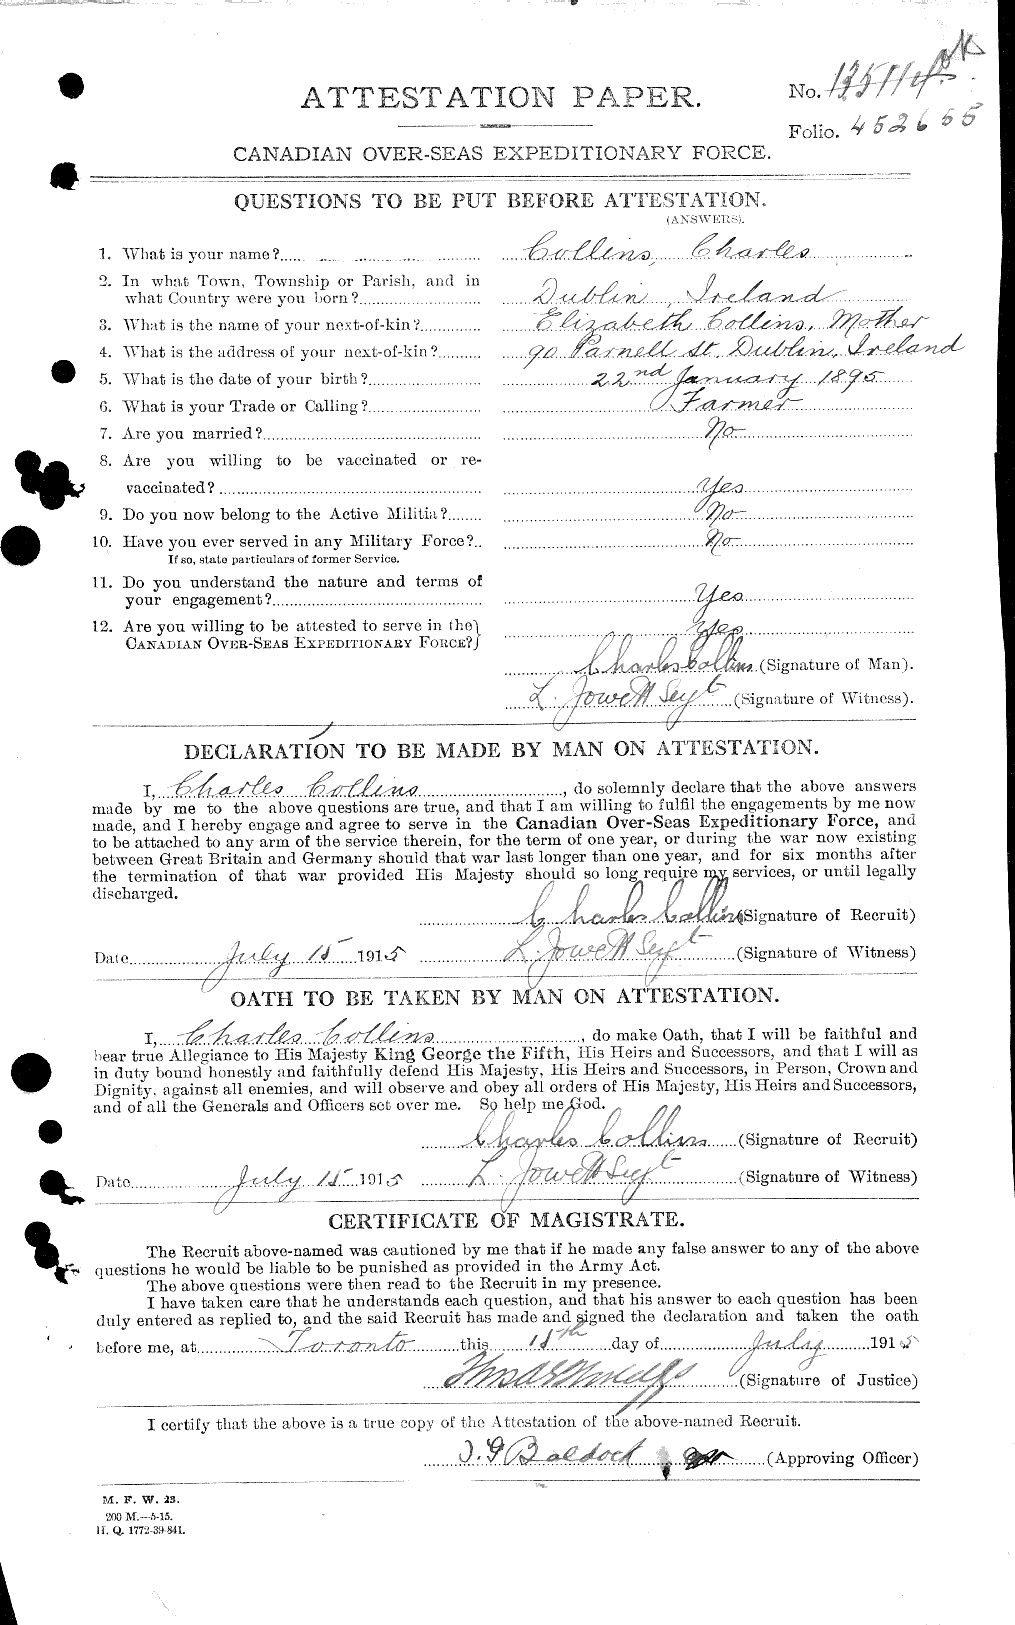 Personnel Records of the First World War - CEF 029010a